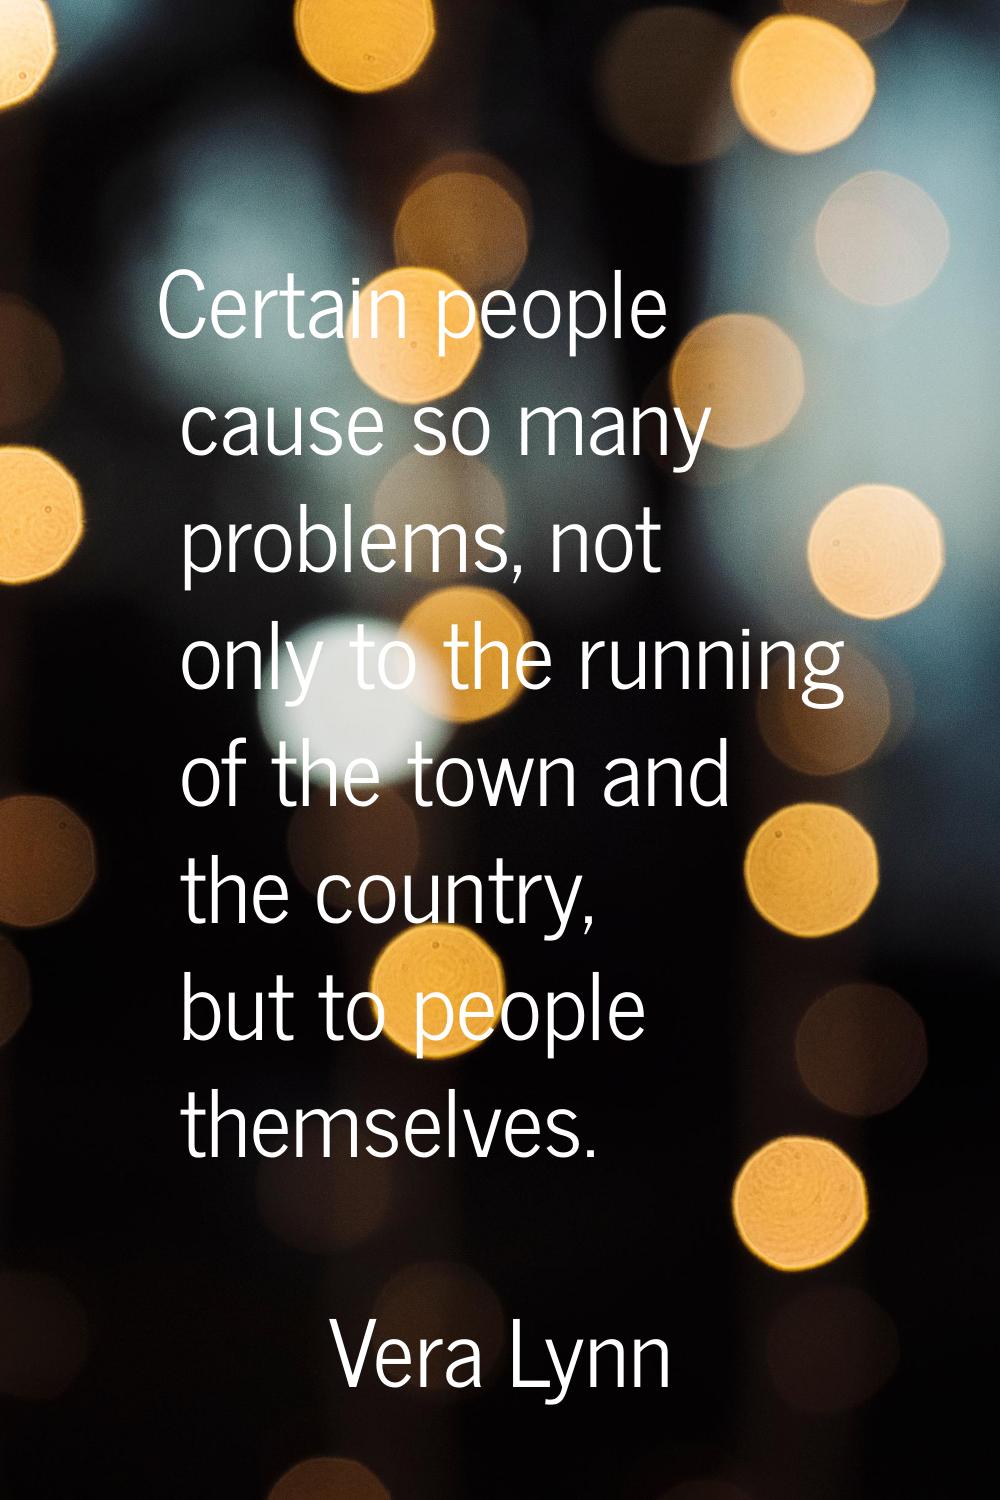 Certain people cause so many problems, not only to the running of the town and the country, but to 